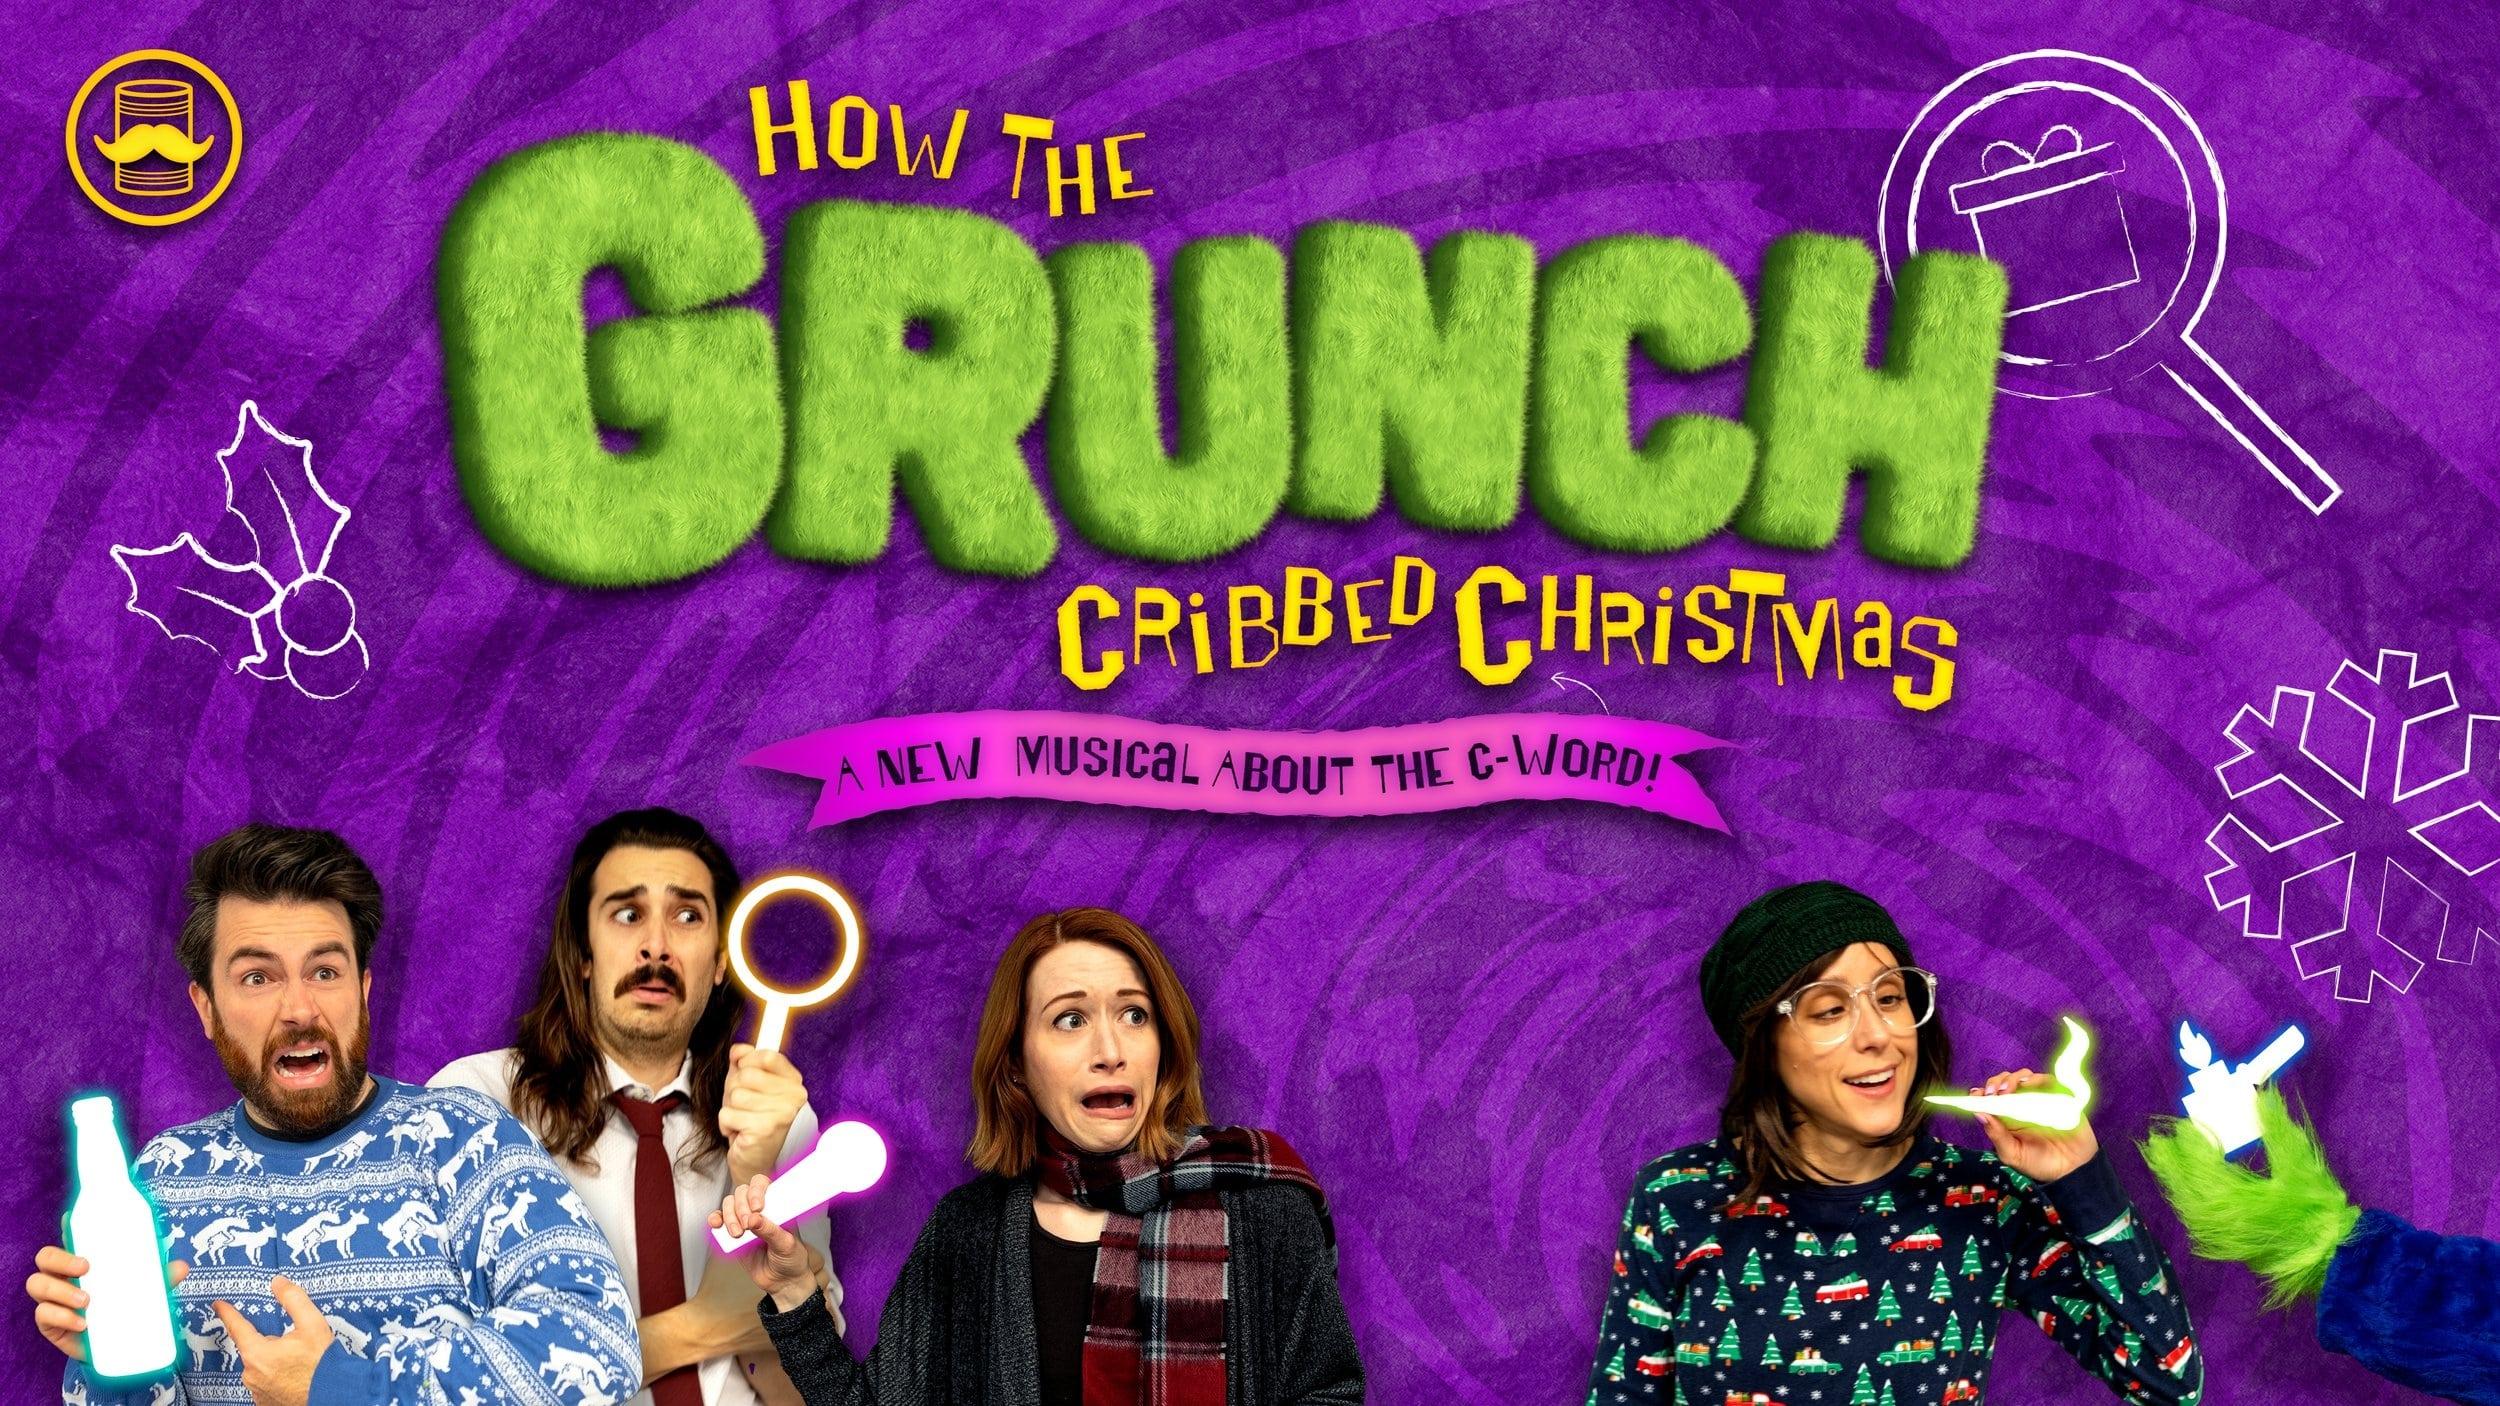 How the Grunch Cribbed Christmas backdrop